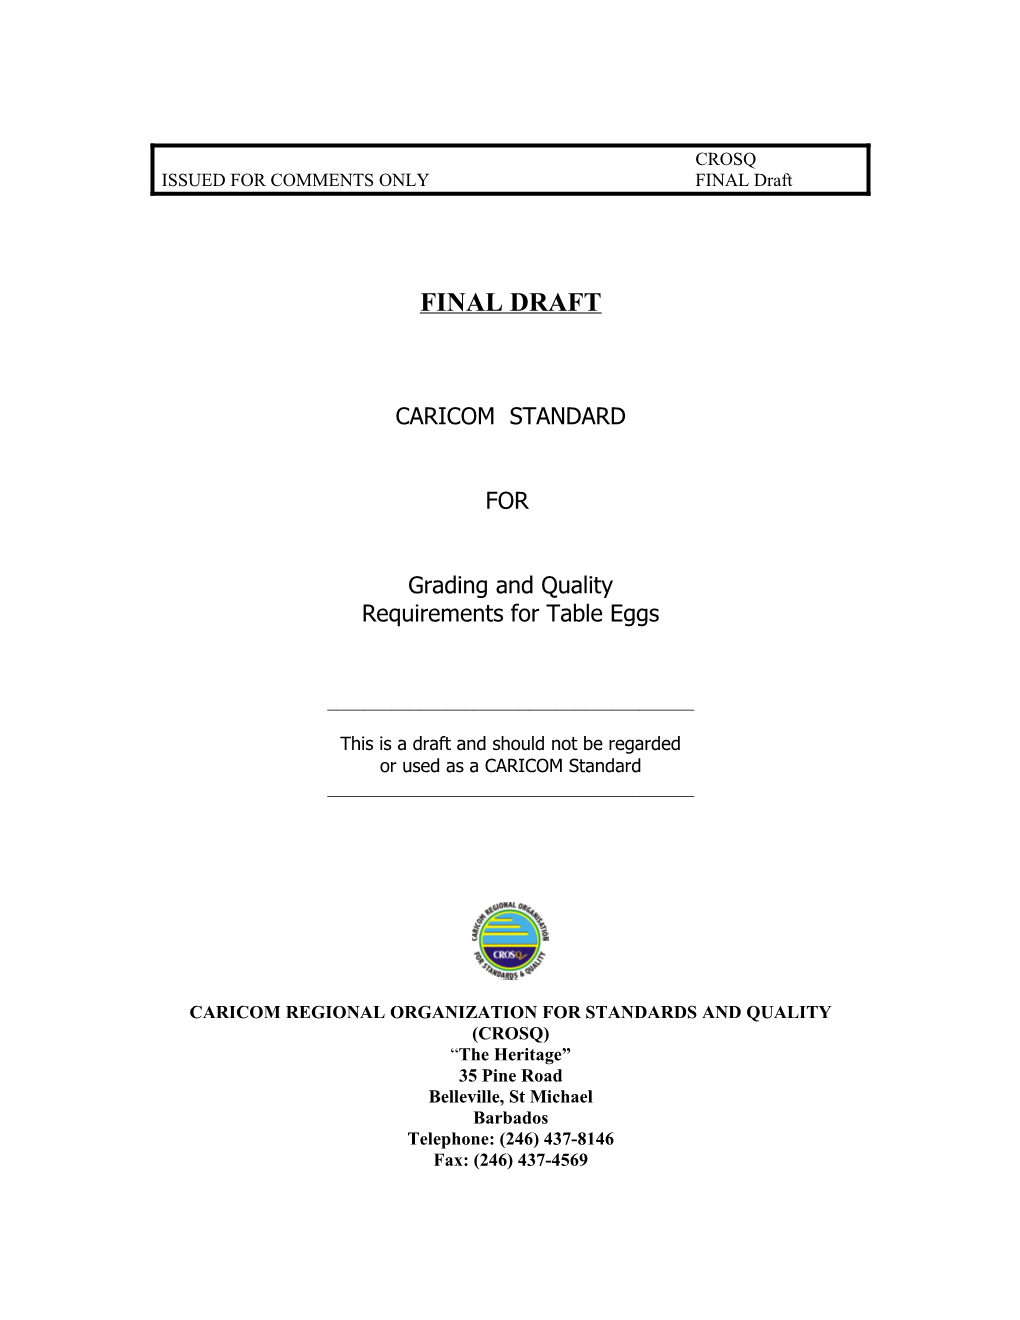 Draft CARICOM Standard for Grading and Quality